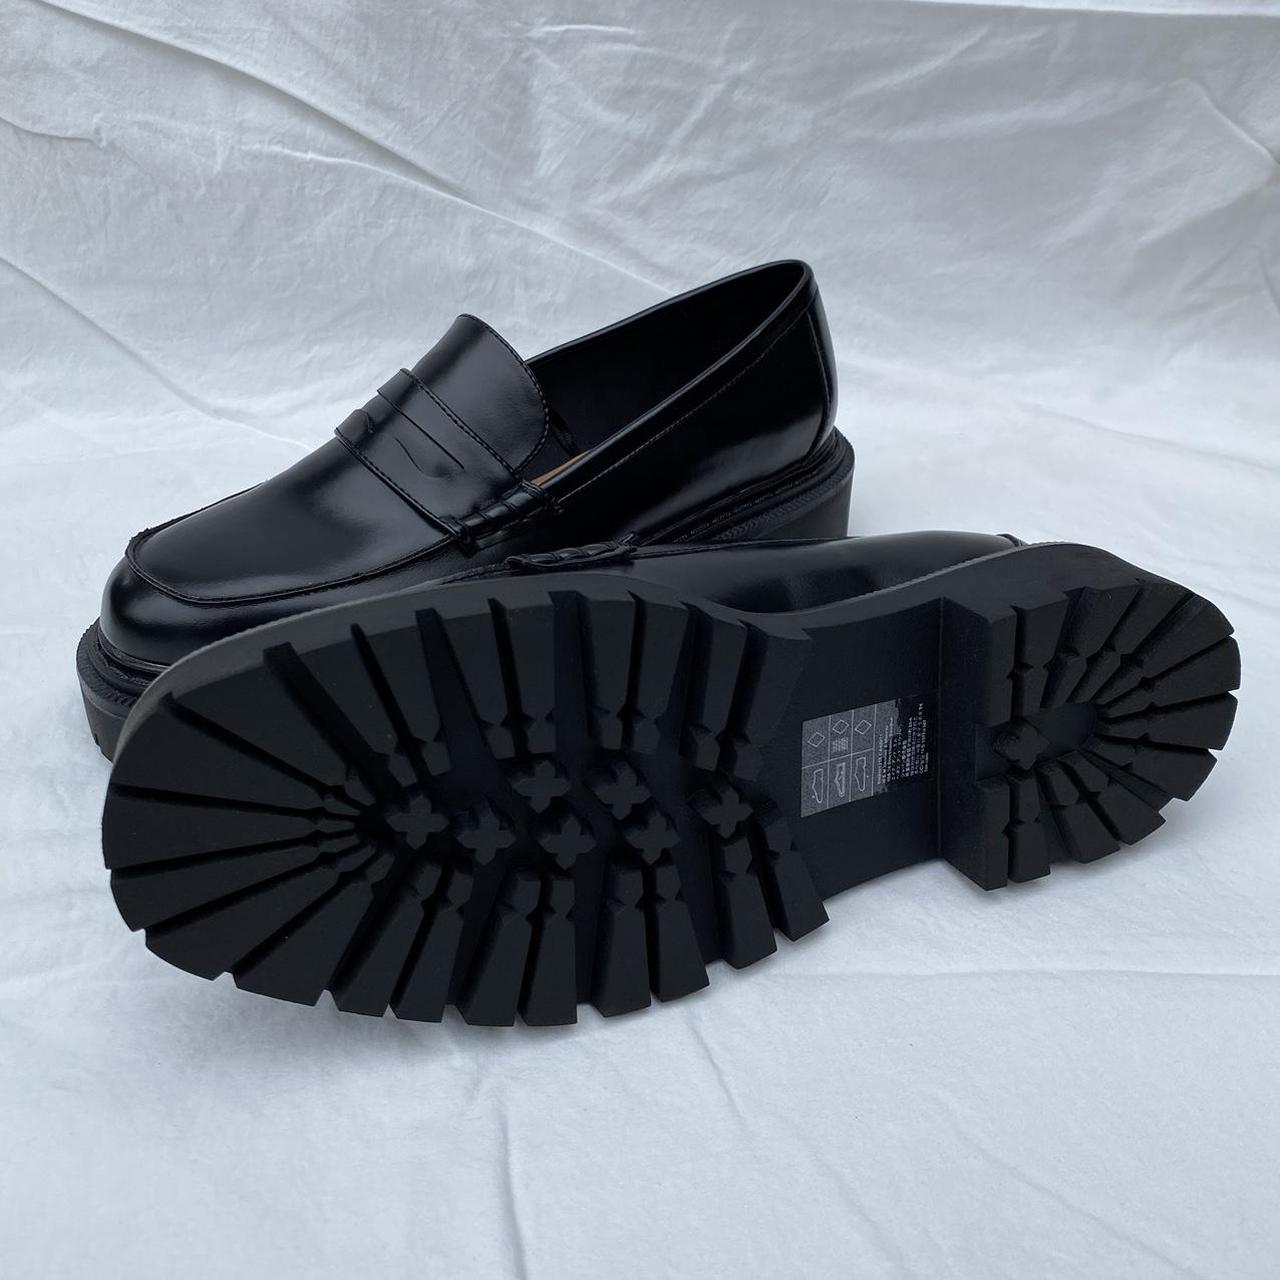 H&M Women's Black Loafers (5)